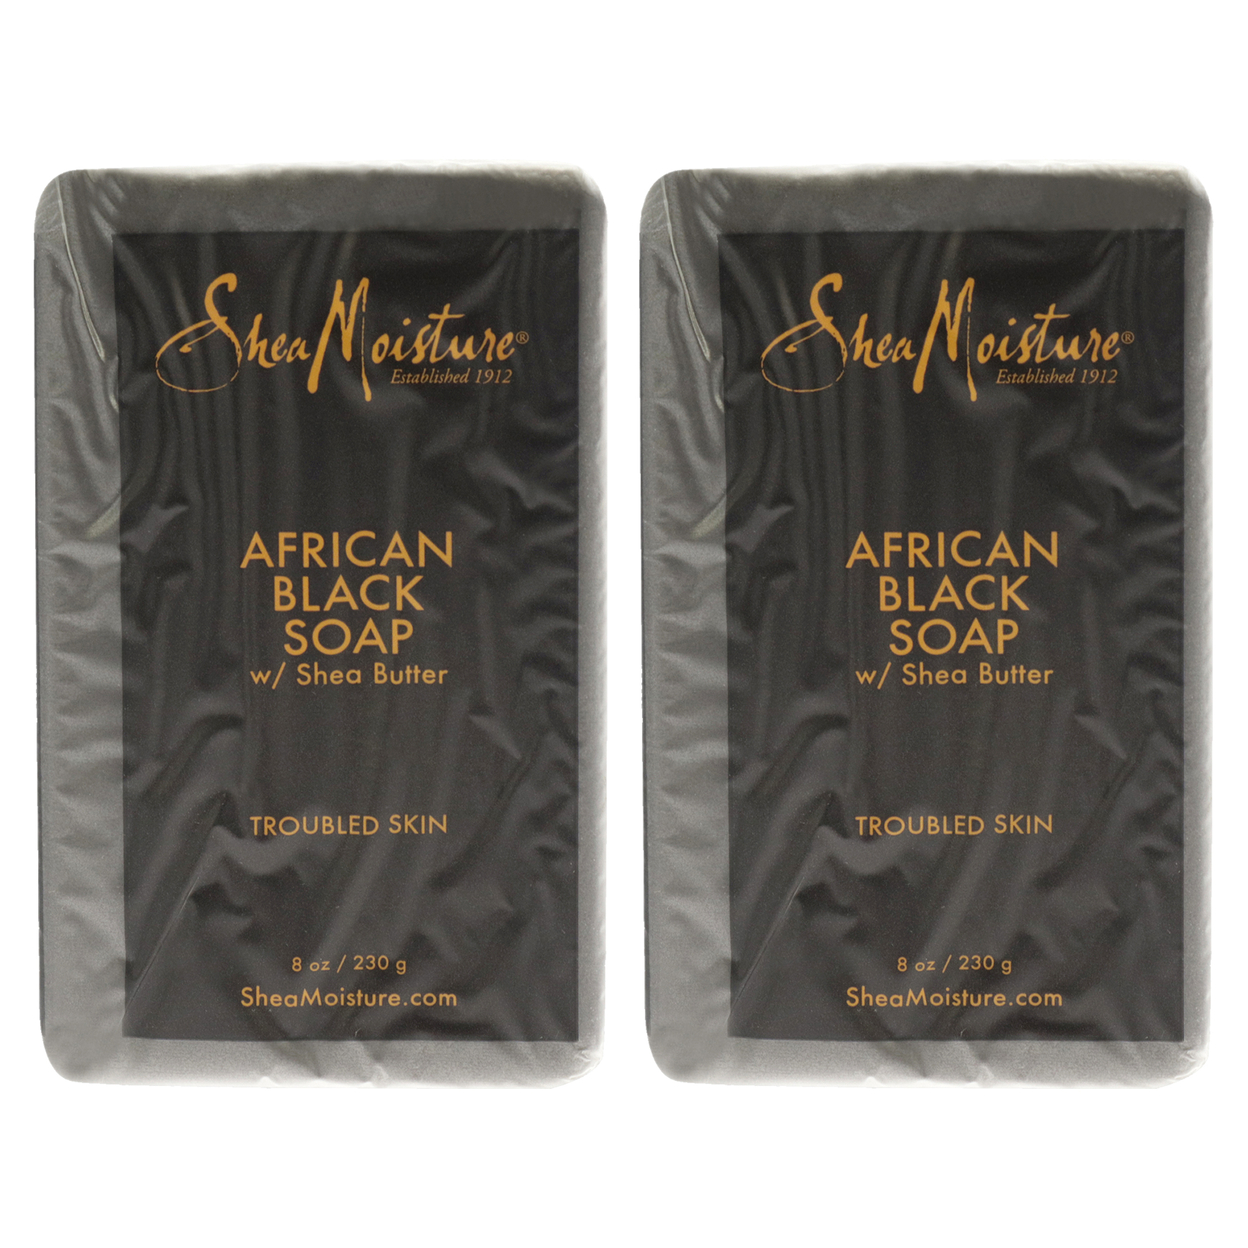 Shea Moisture African Black Soap Bar Acne Prone And Troubled Skin Pack Of 2 8 Oz